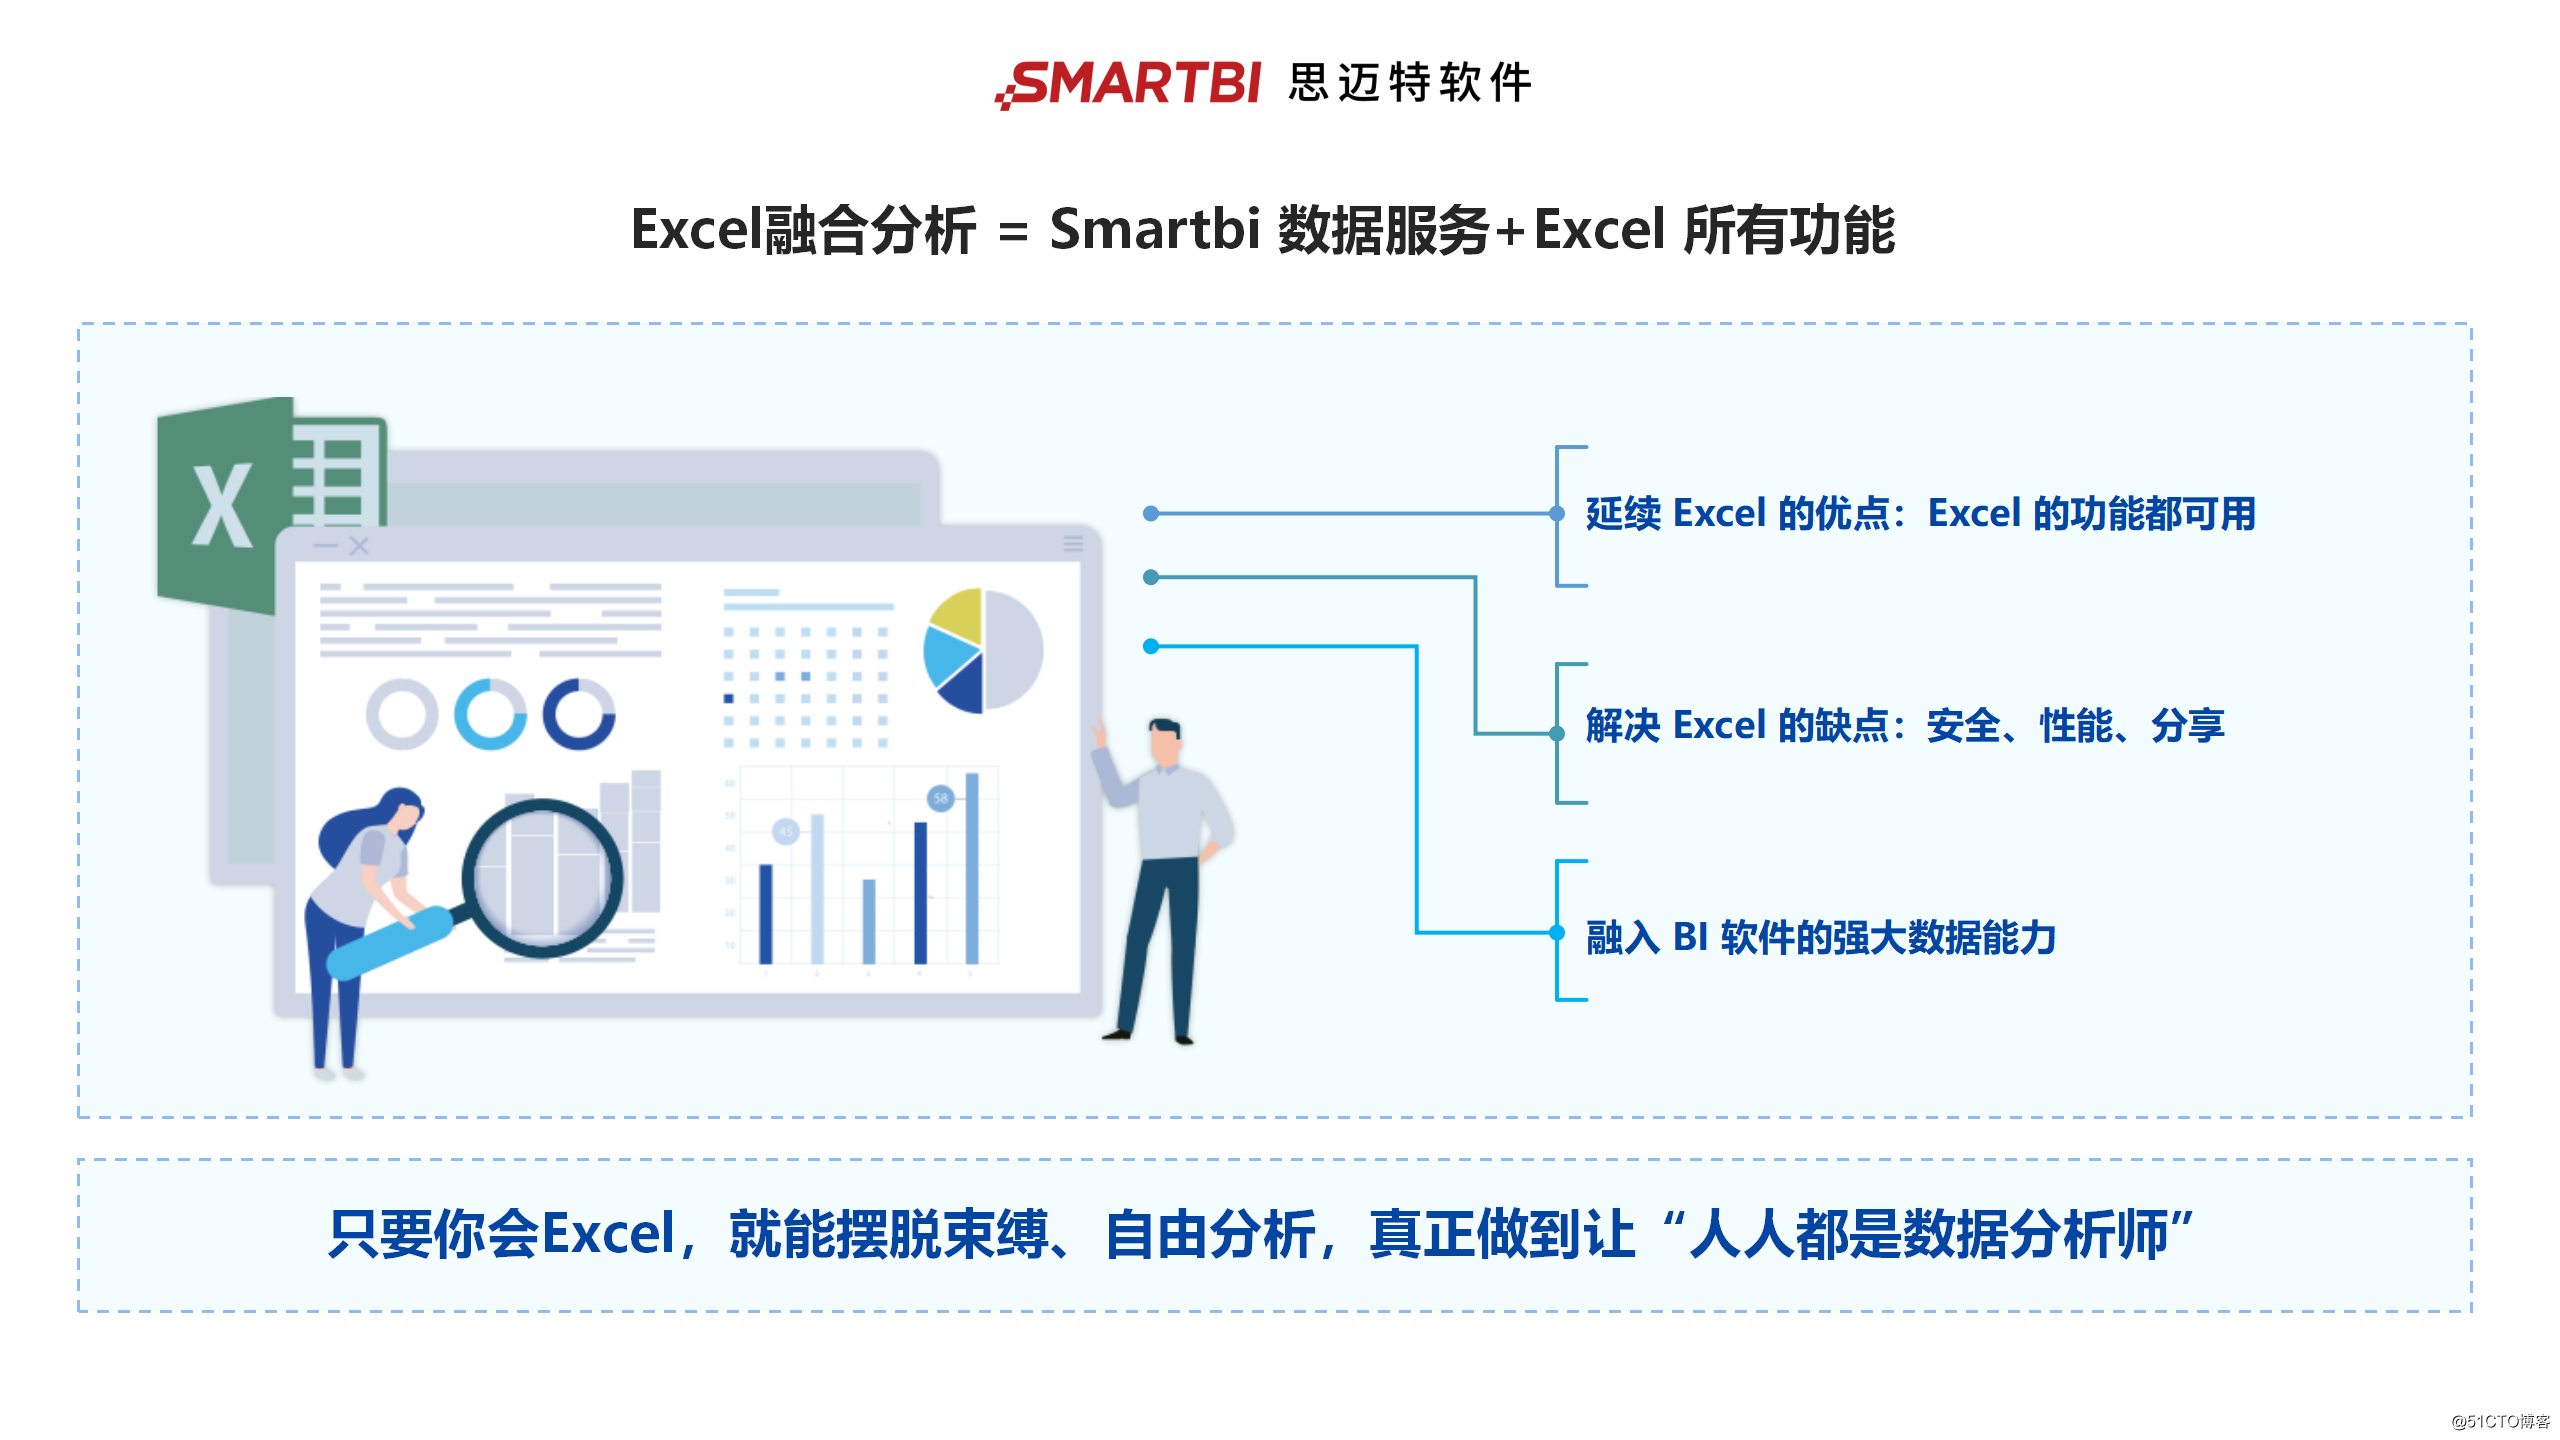 Smartbi Excel integration analysis-perfect integration of Excel and BI, truly empowering first-line users